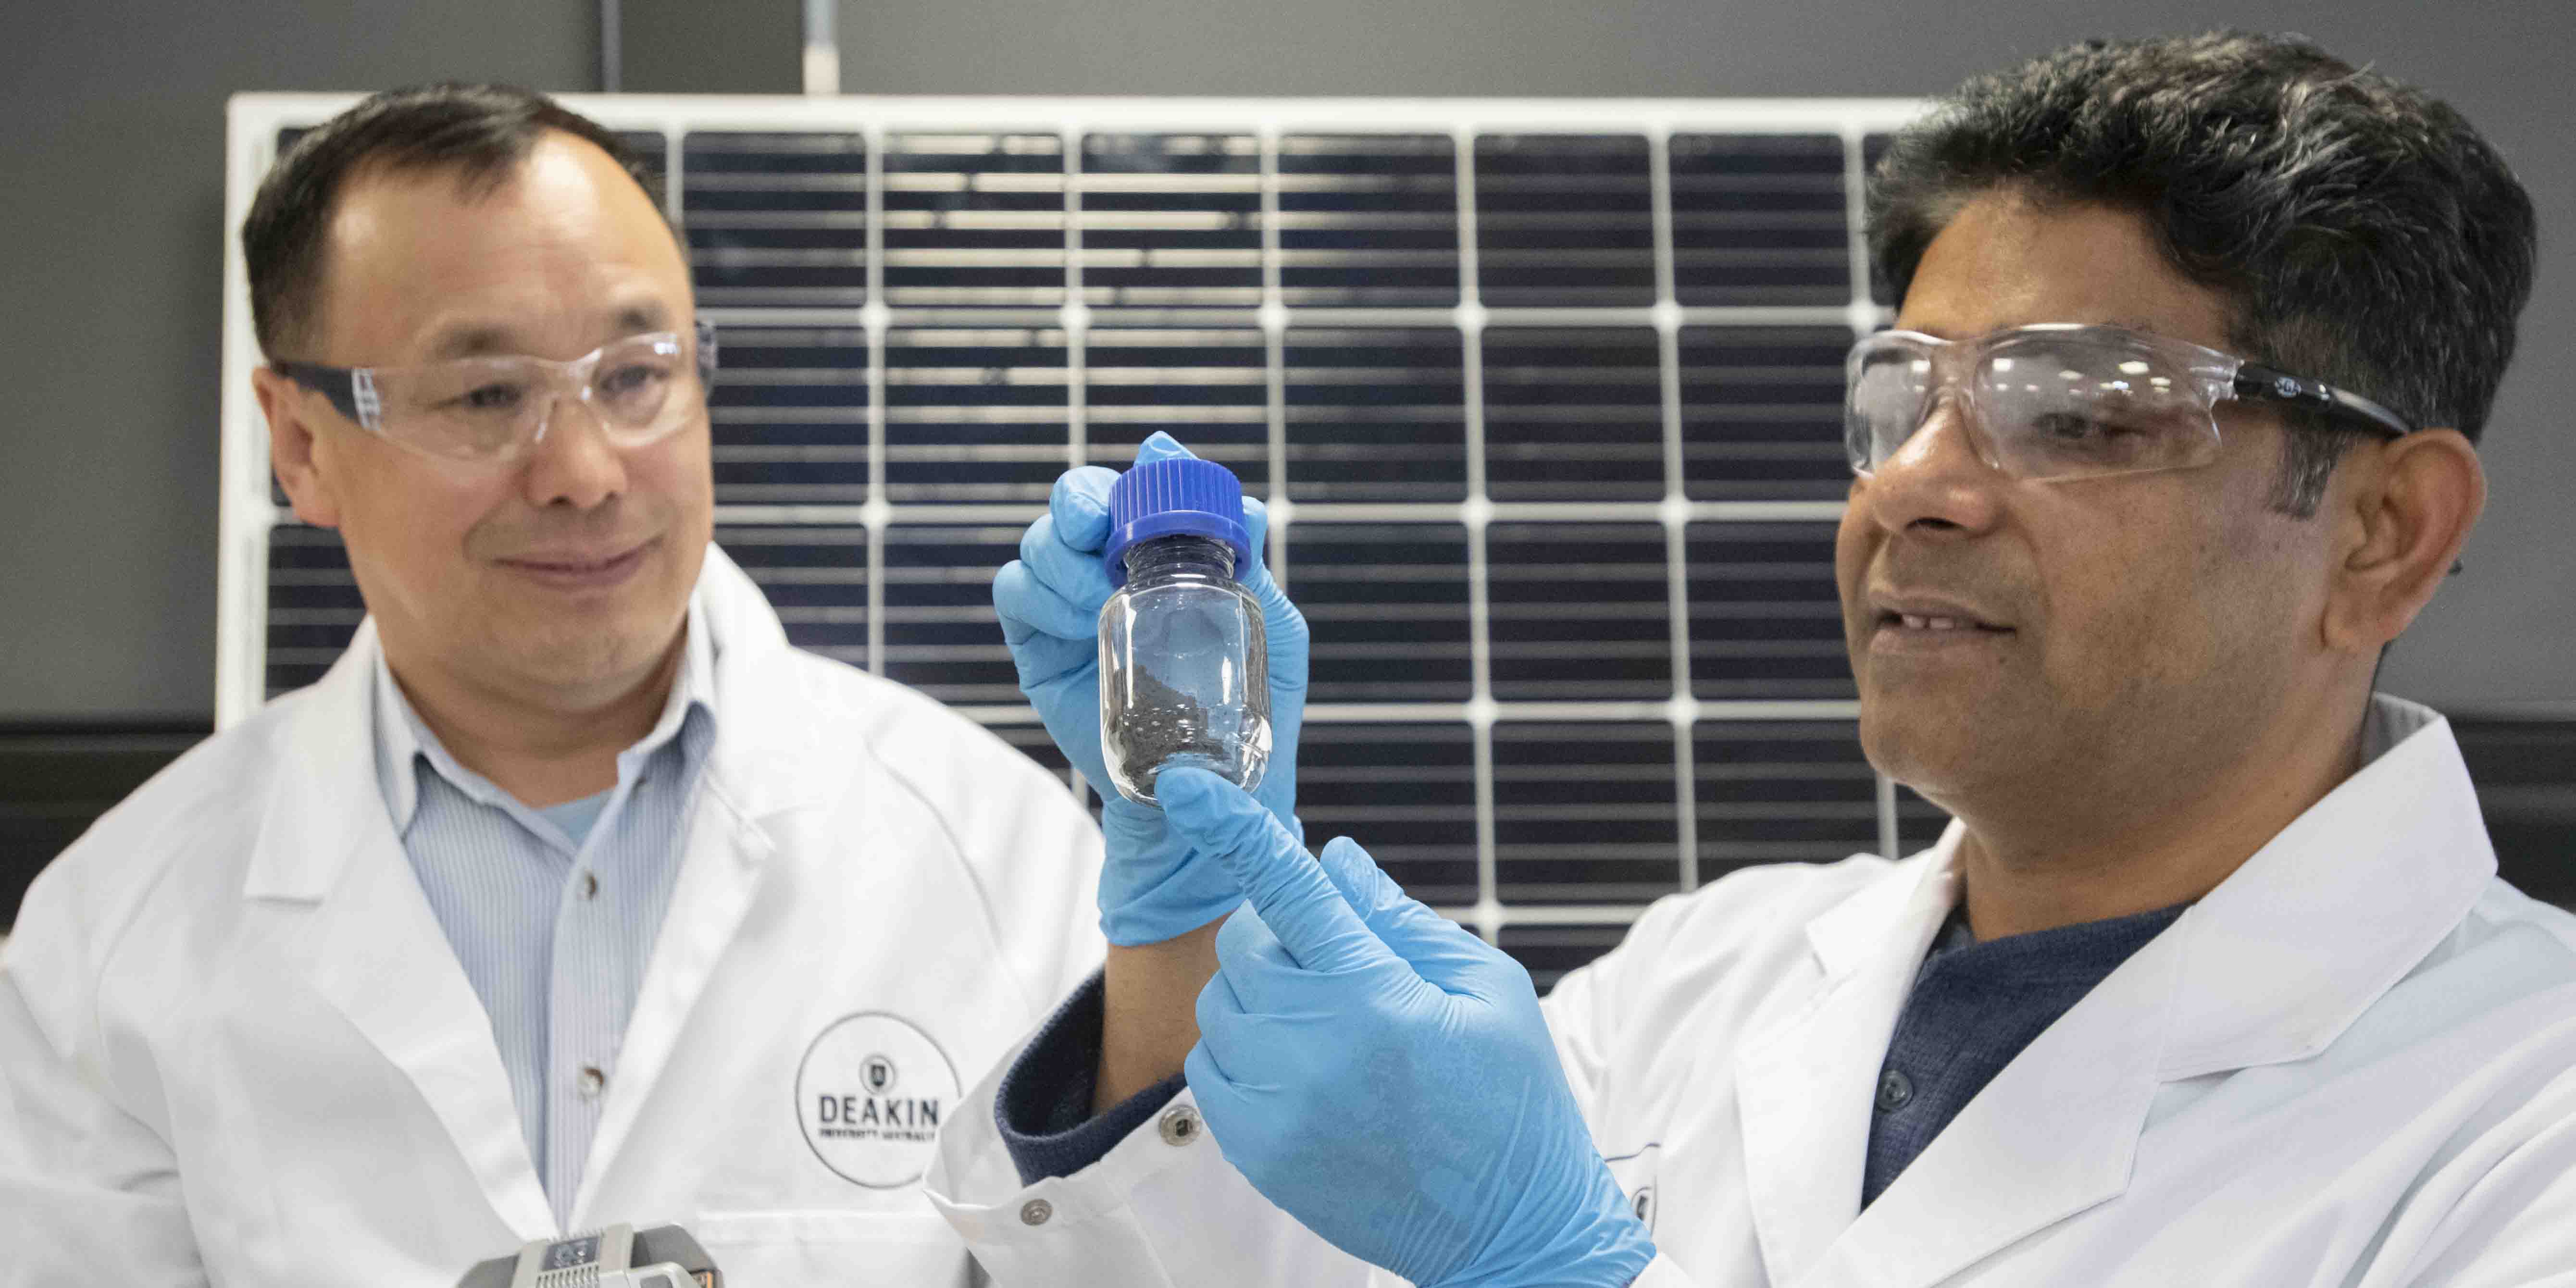 Deakin researchers find key solution to recycling solar panels